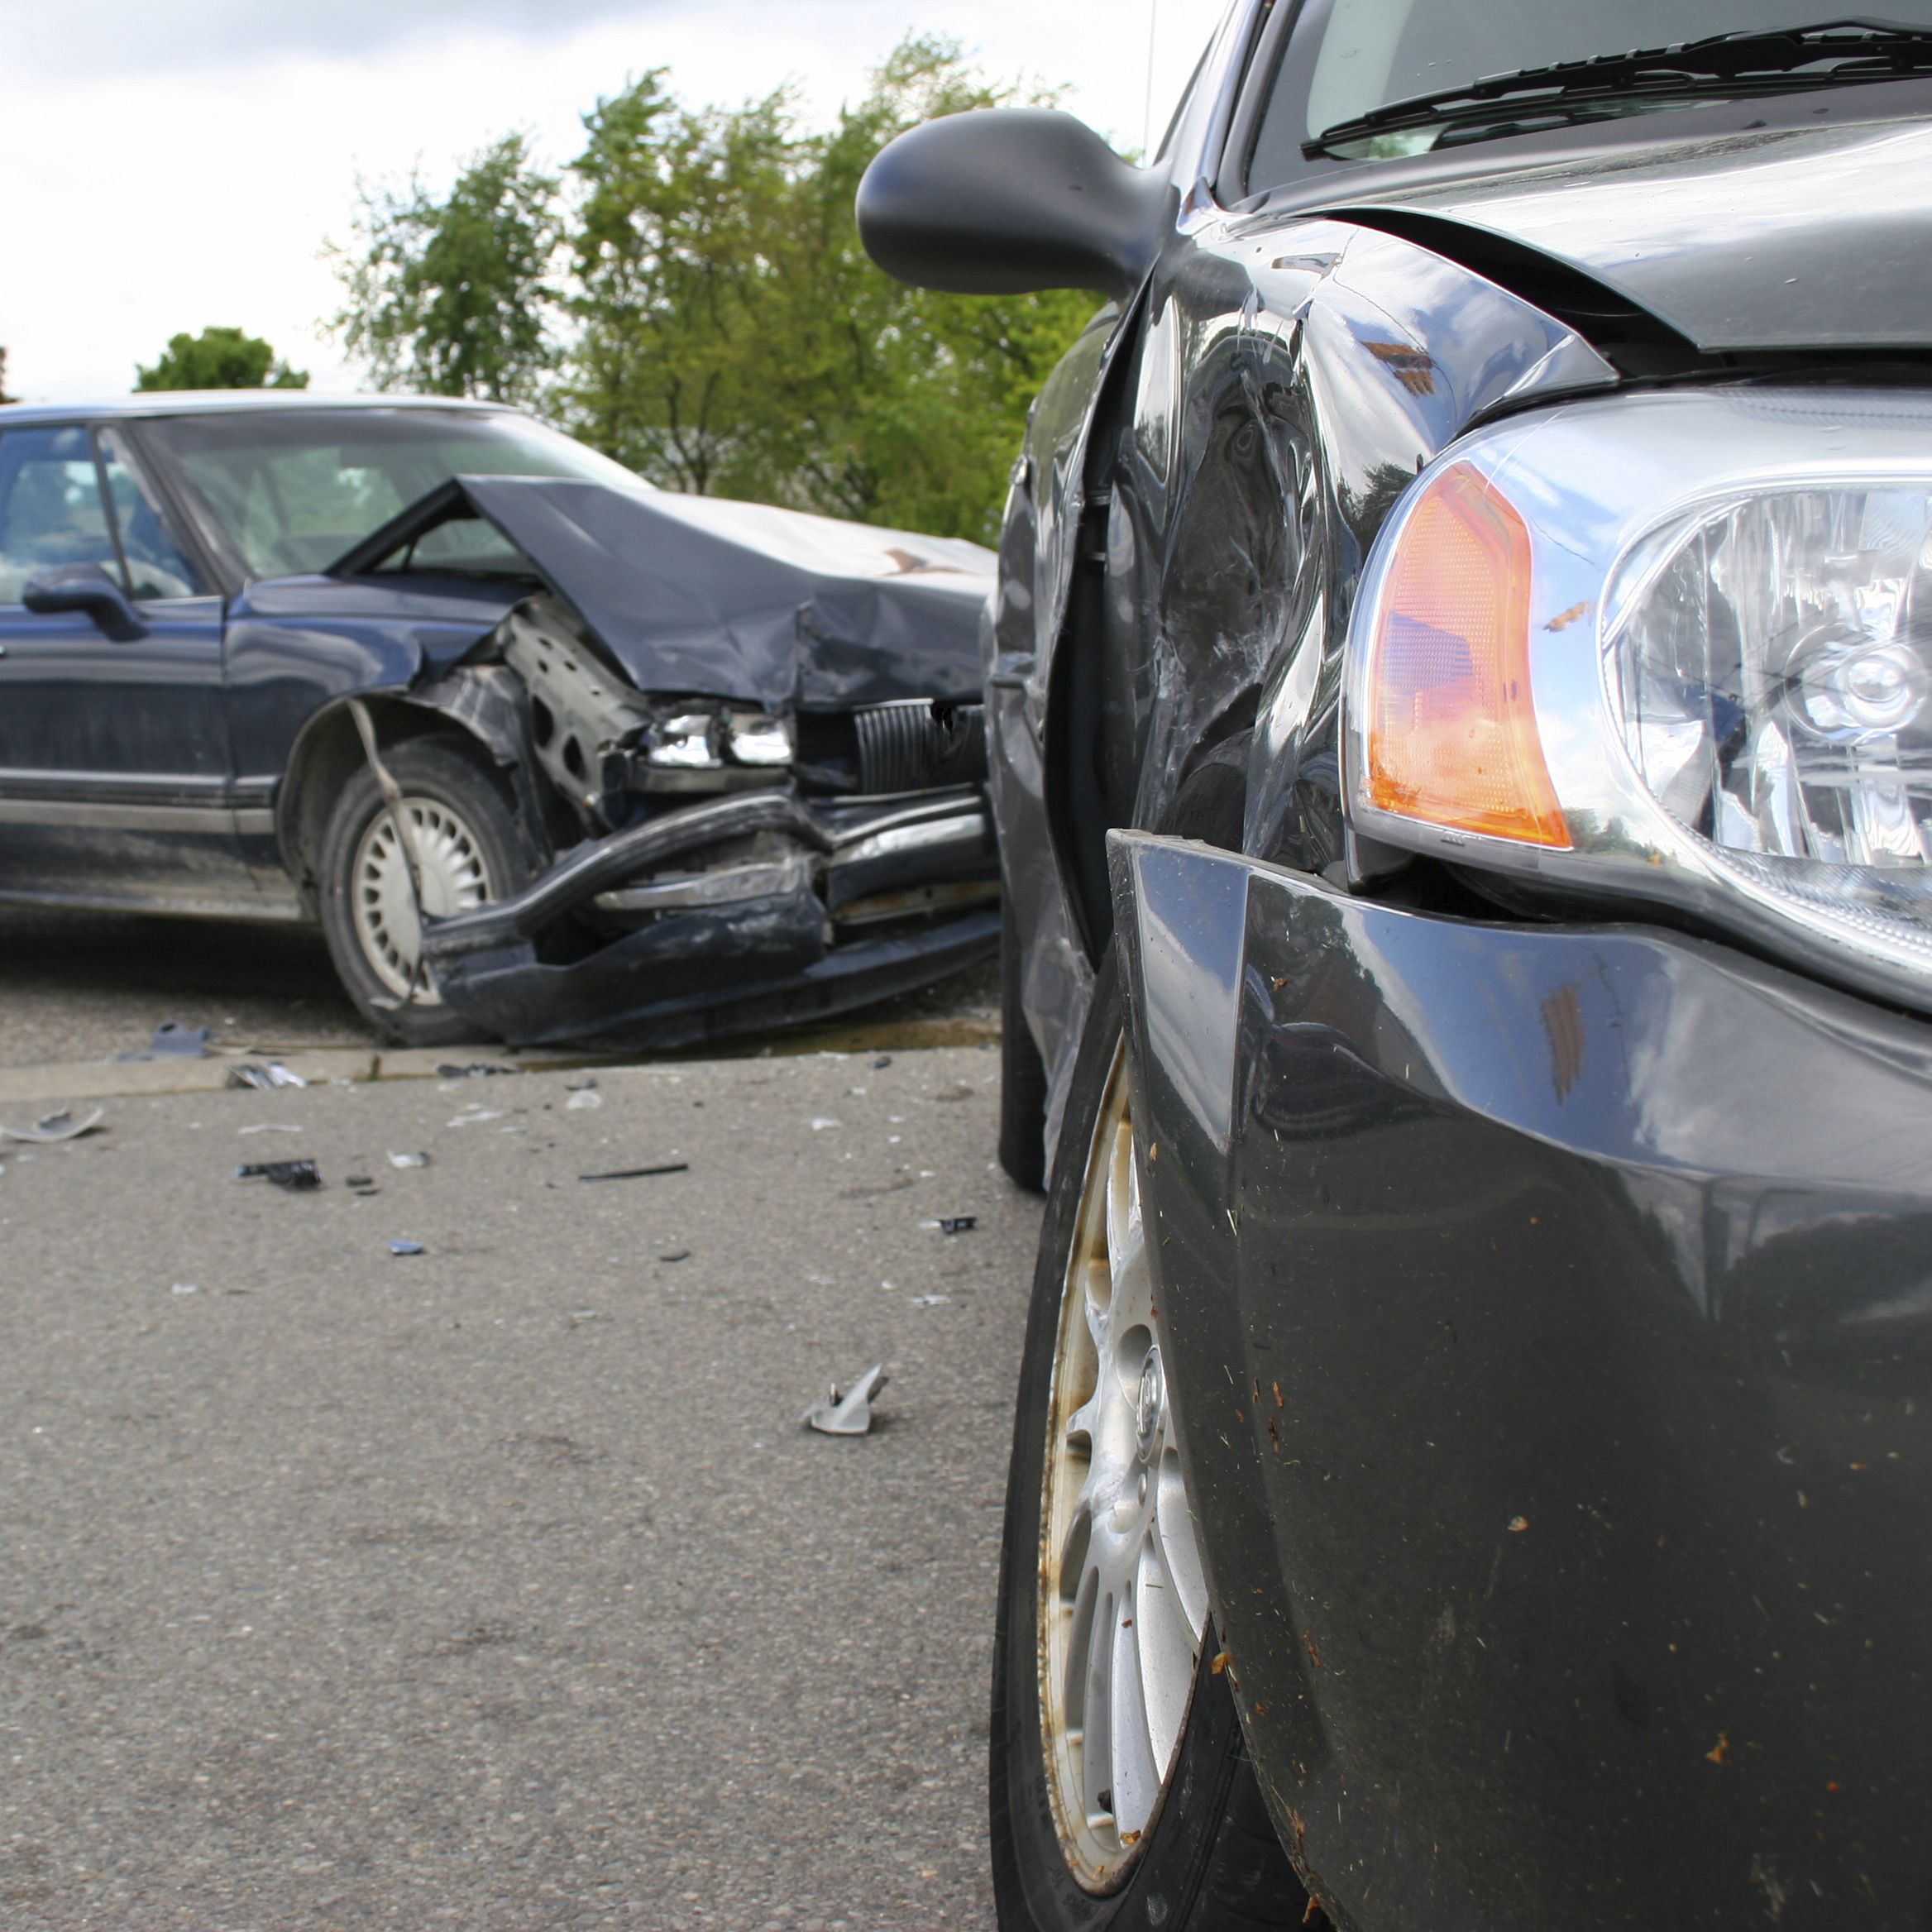 Unsafe Lane Changes Can Cause Serious Auto Accidents - Bowles & Verna, LLP